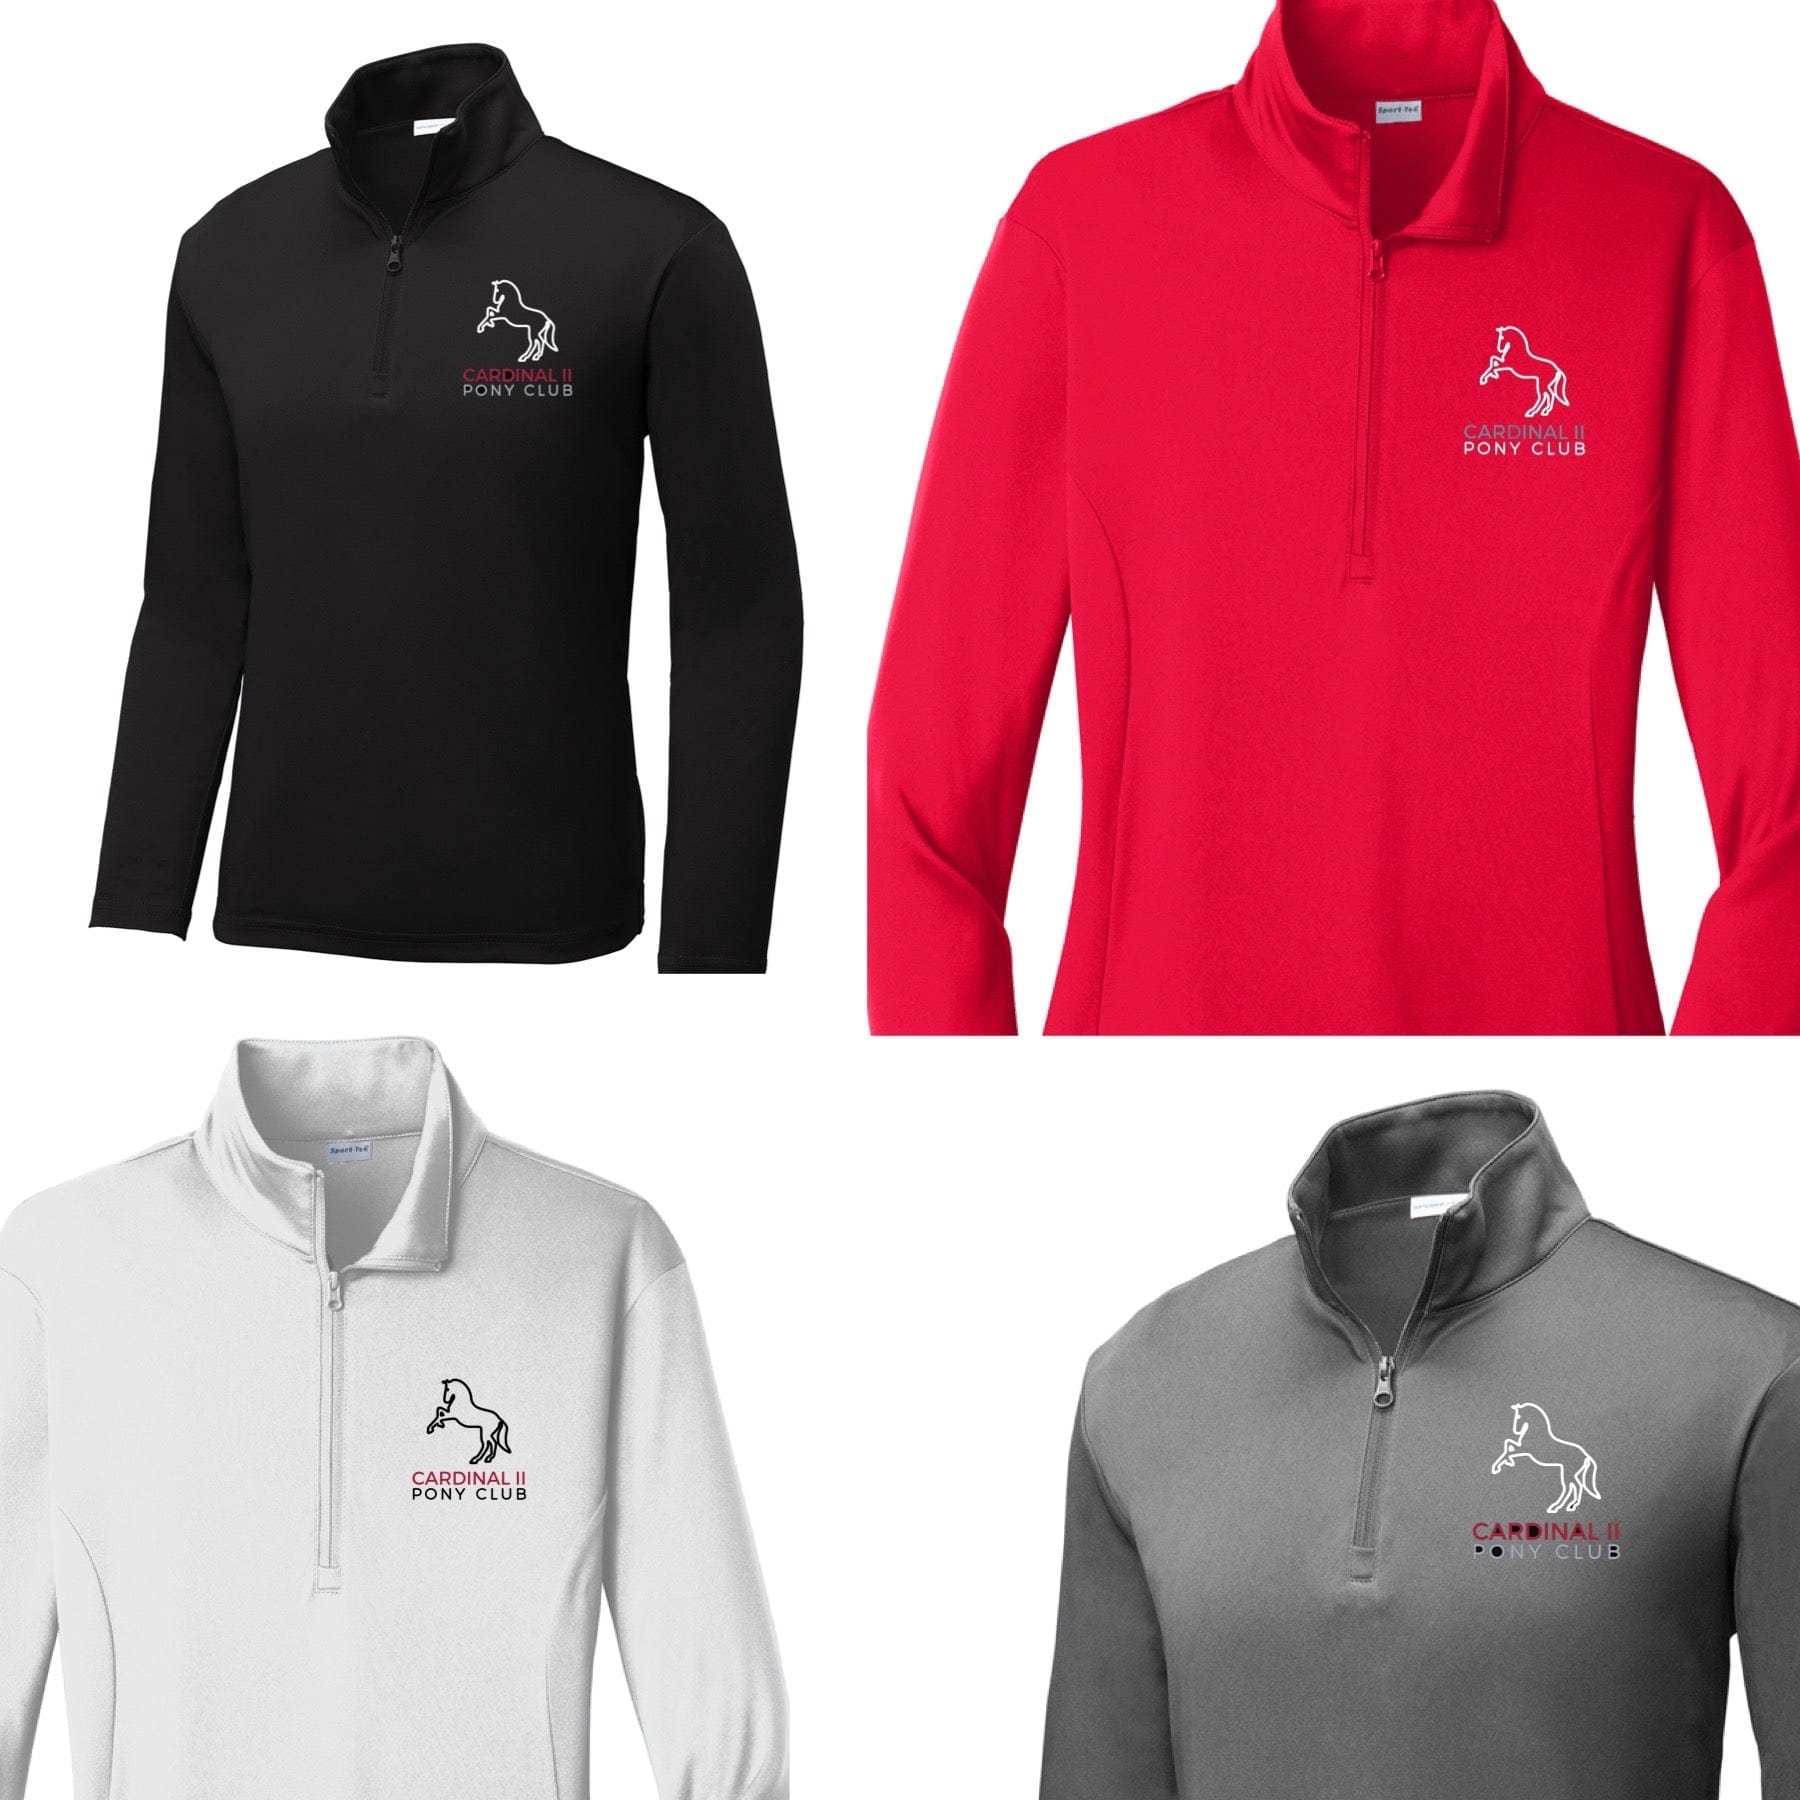 Equestrian Team Apparel Cardinal II Pony Club Tech Shirt equestrian team apparel online tack store mobile tack store custom farm apparel custom show stable clothing equestrian lifestyle horse show clothing riding clothes horses equestrian tack store